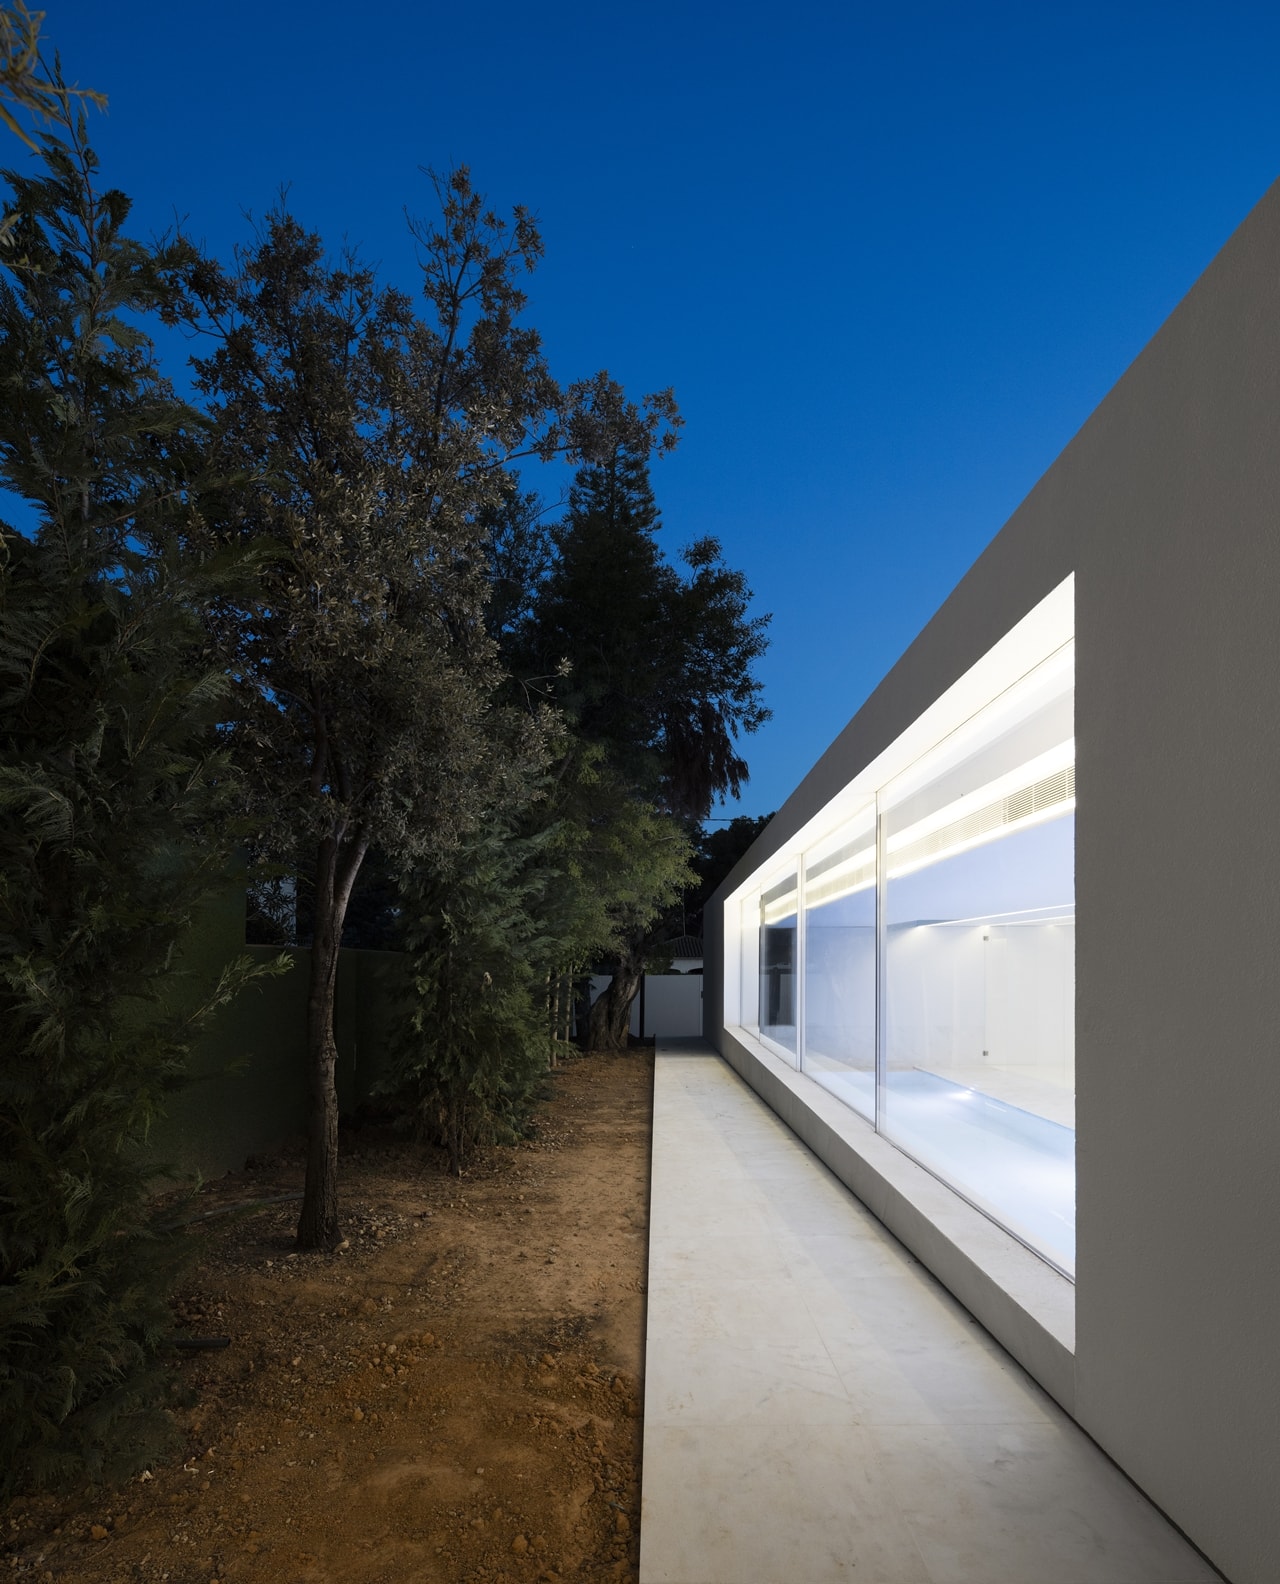 Facade of minimalist house designed by Fran Silvestre Architects at night